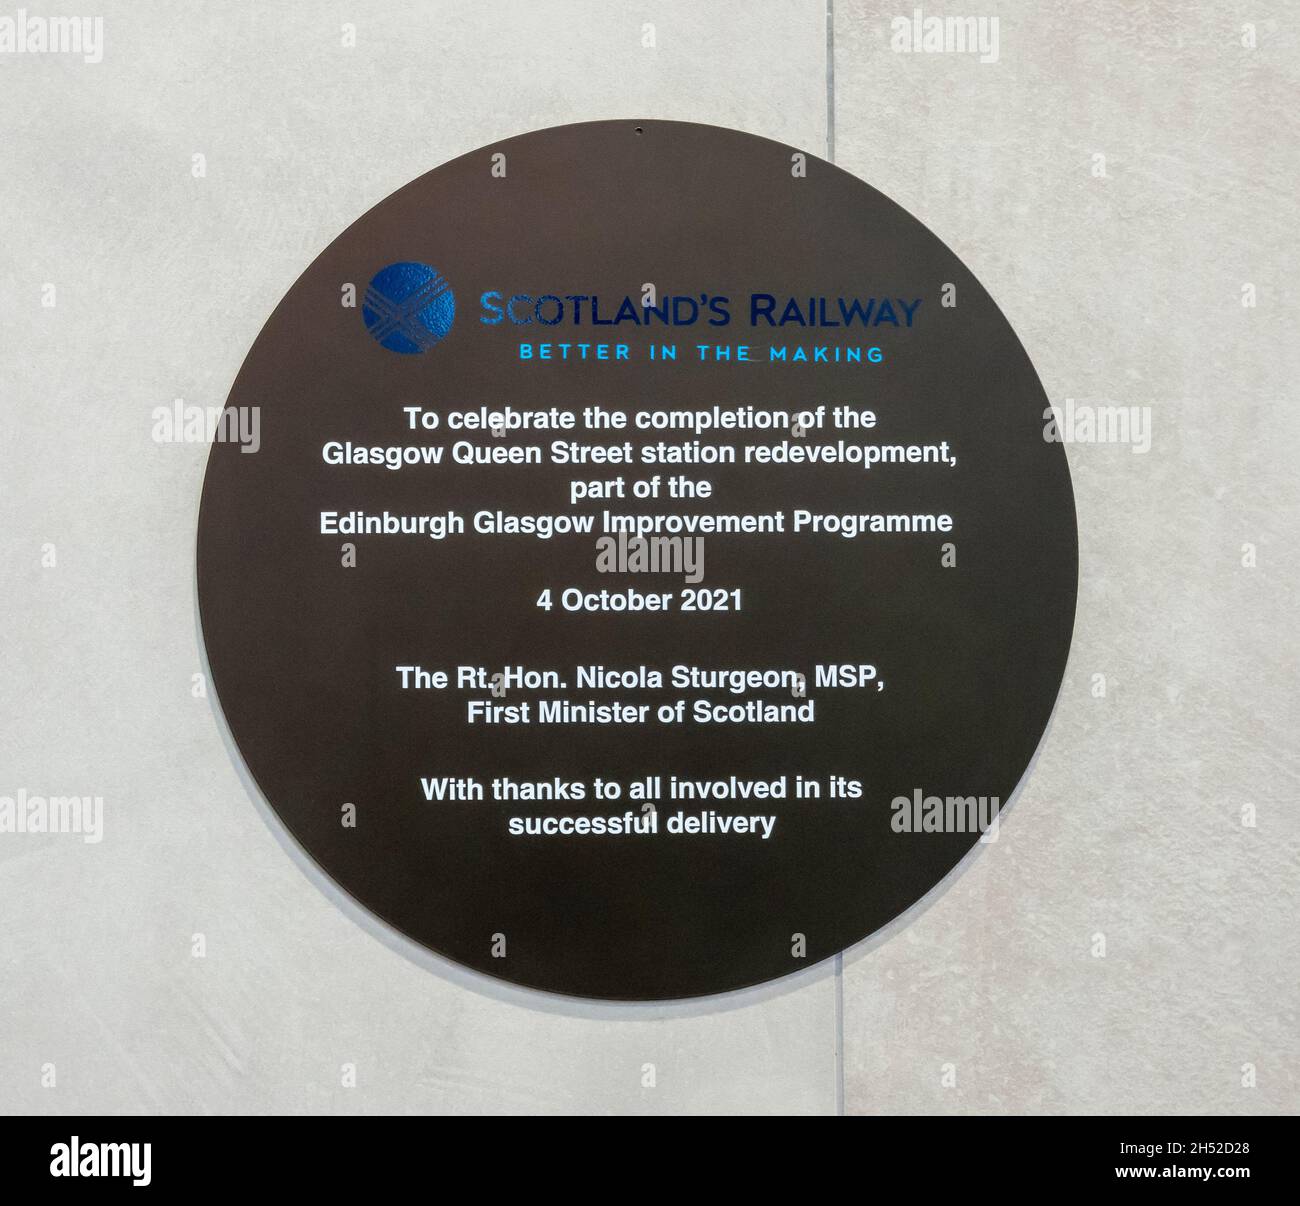 Plaque in Queen Street Railway Station Glasgow Scotland UK to celebrate completion of Glasgow Queen Street Station redevelopment programme 4 oct. 2021 Stock Photo